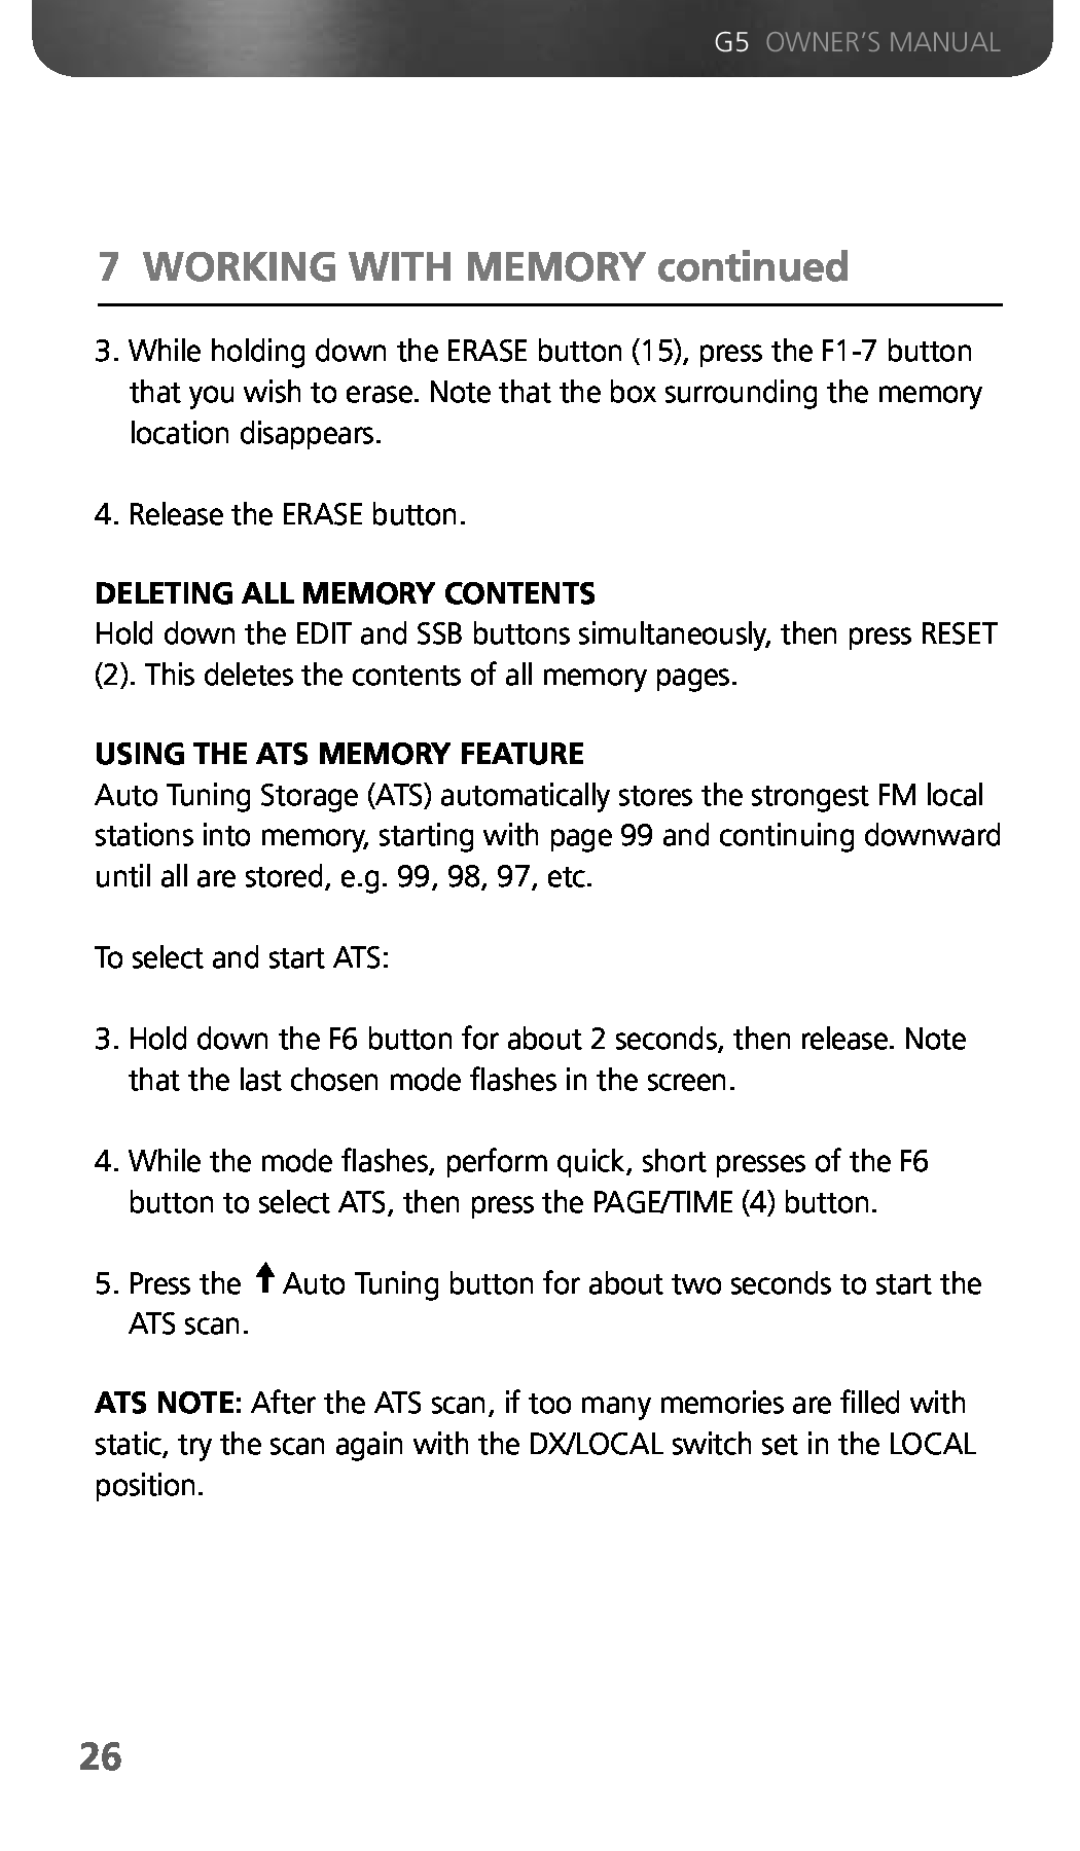 Eton G5 owner manual WORKING WITH MEMORY continued, Deleting All Memory Contents, Using The Ats Memory Feature 